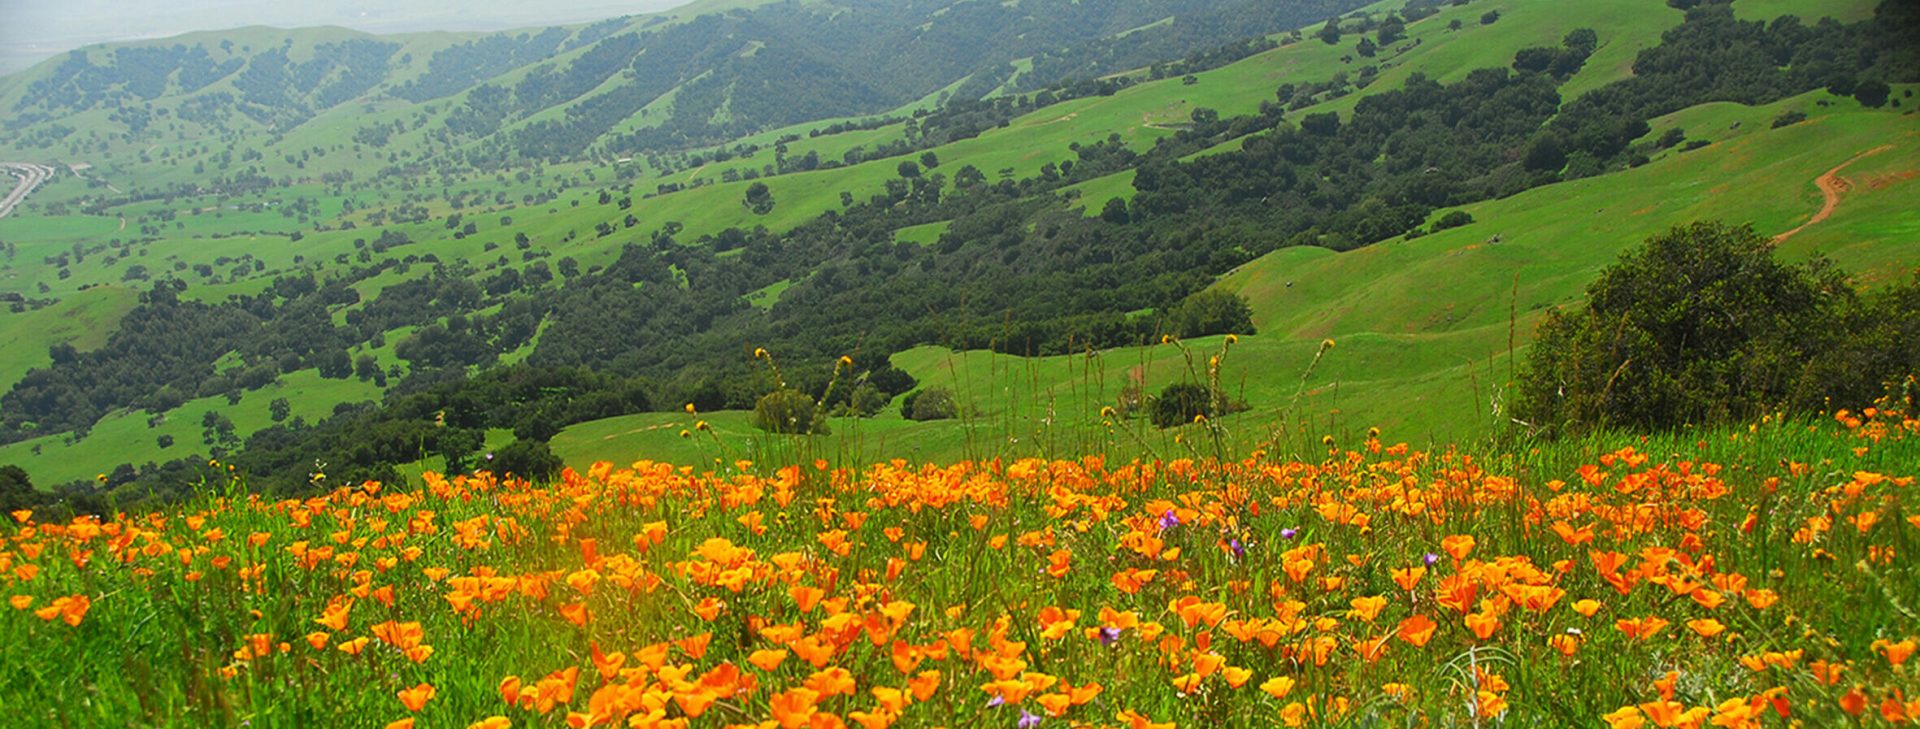 green hills and orange poppies